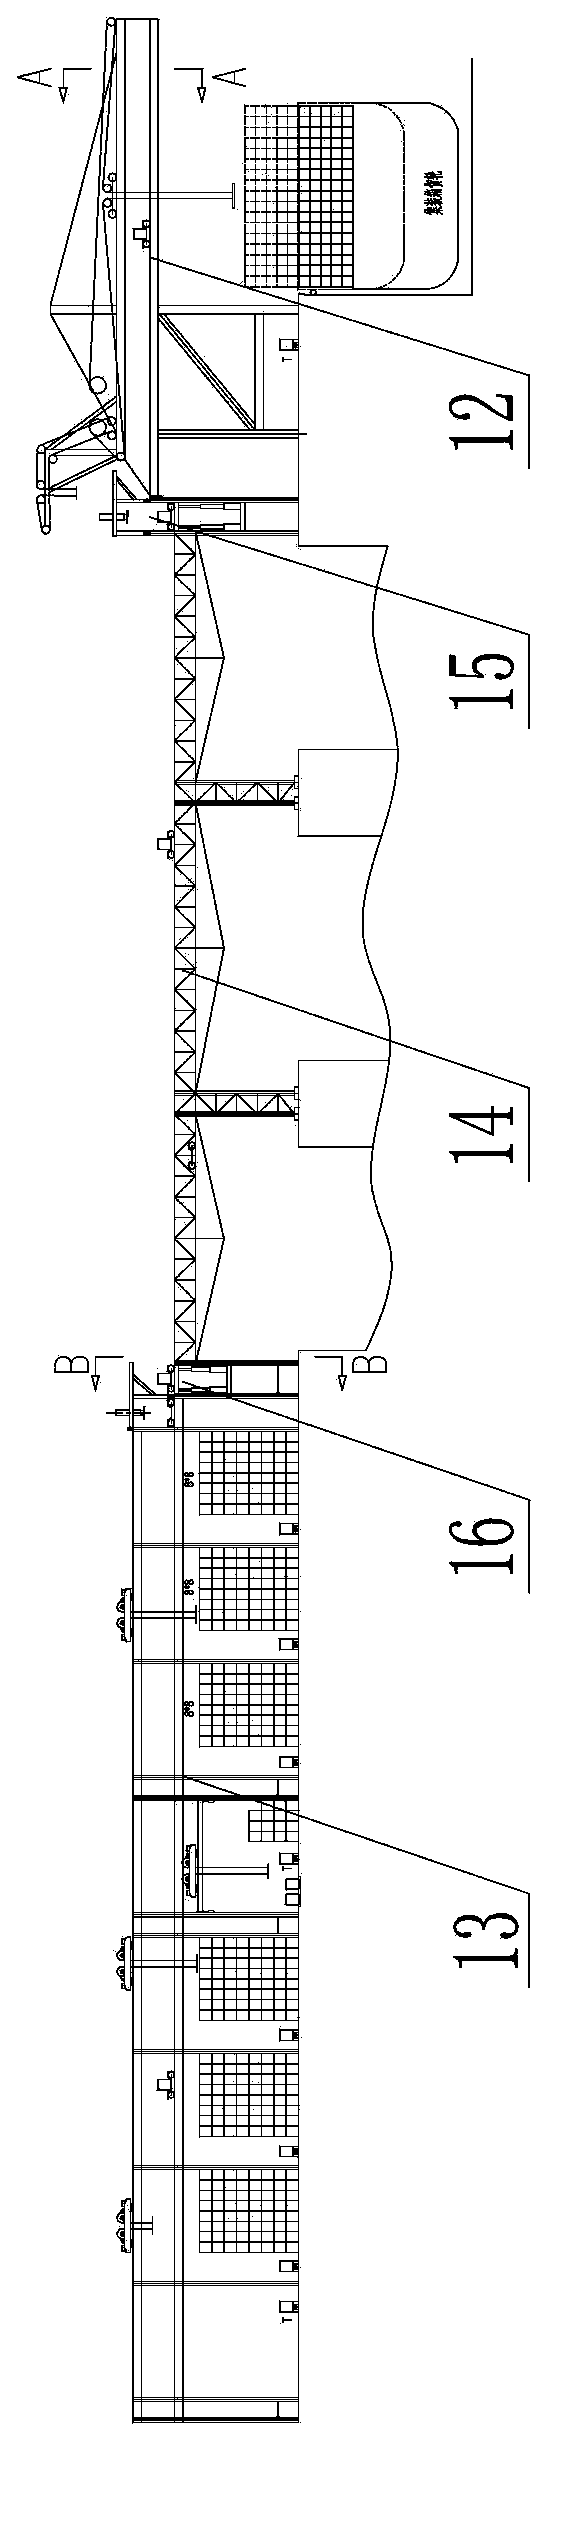 Loading and unloading process for cross-sea container and container loading and unloading system with cross-sea trestle